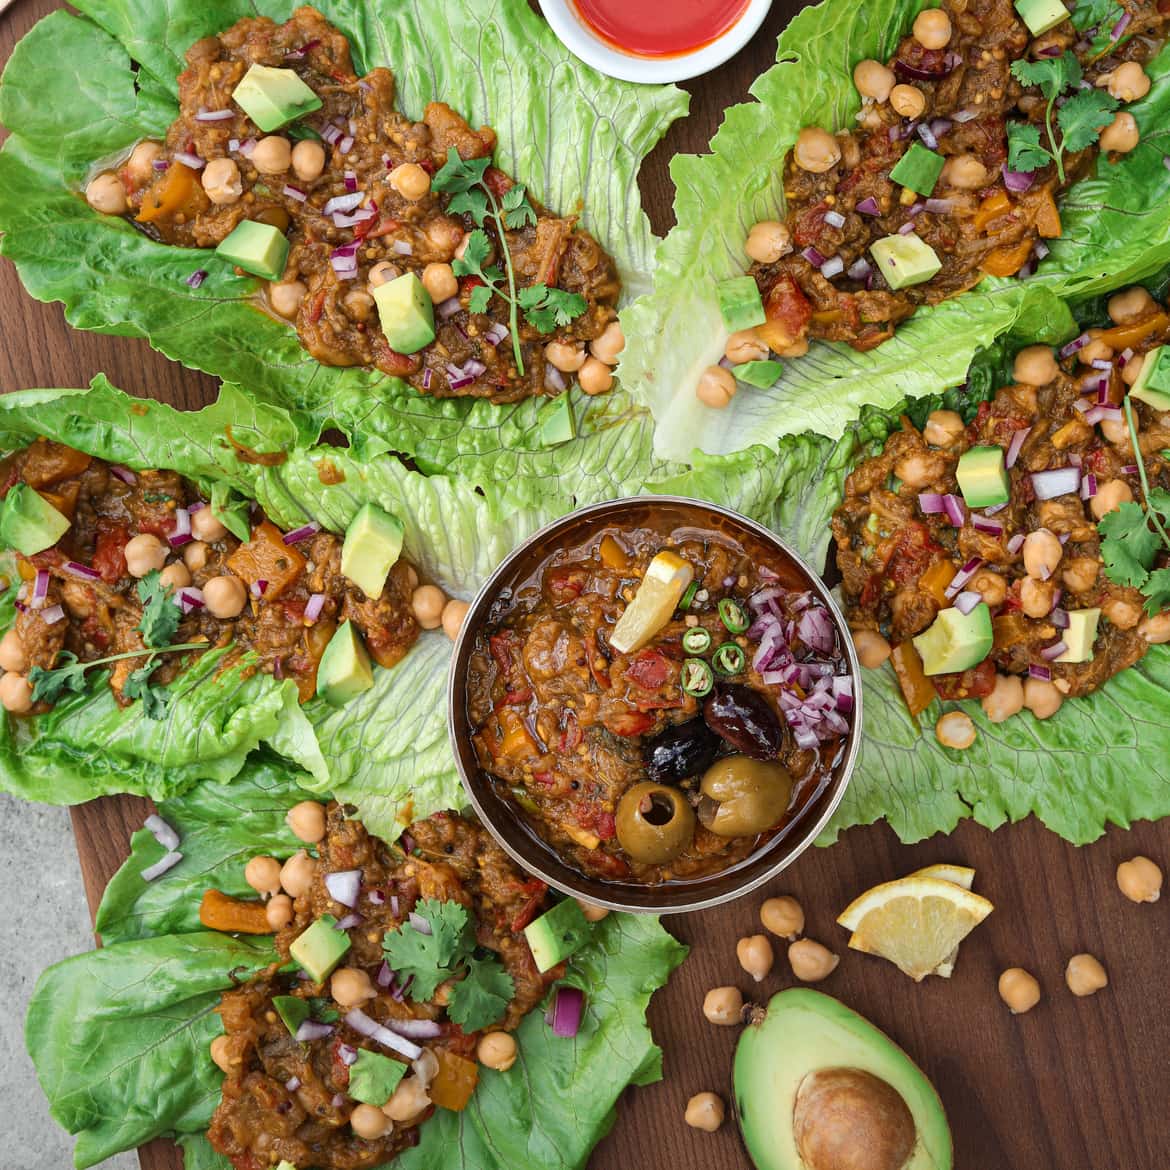 lettuce leaves filled with baingan bharta (Indian eggplant recipe) with a bowl of baingan bharta in the center.